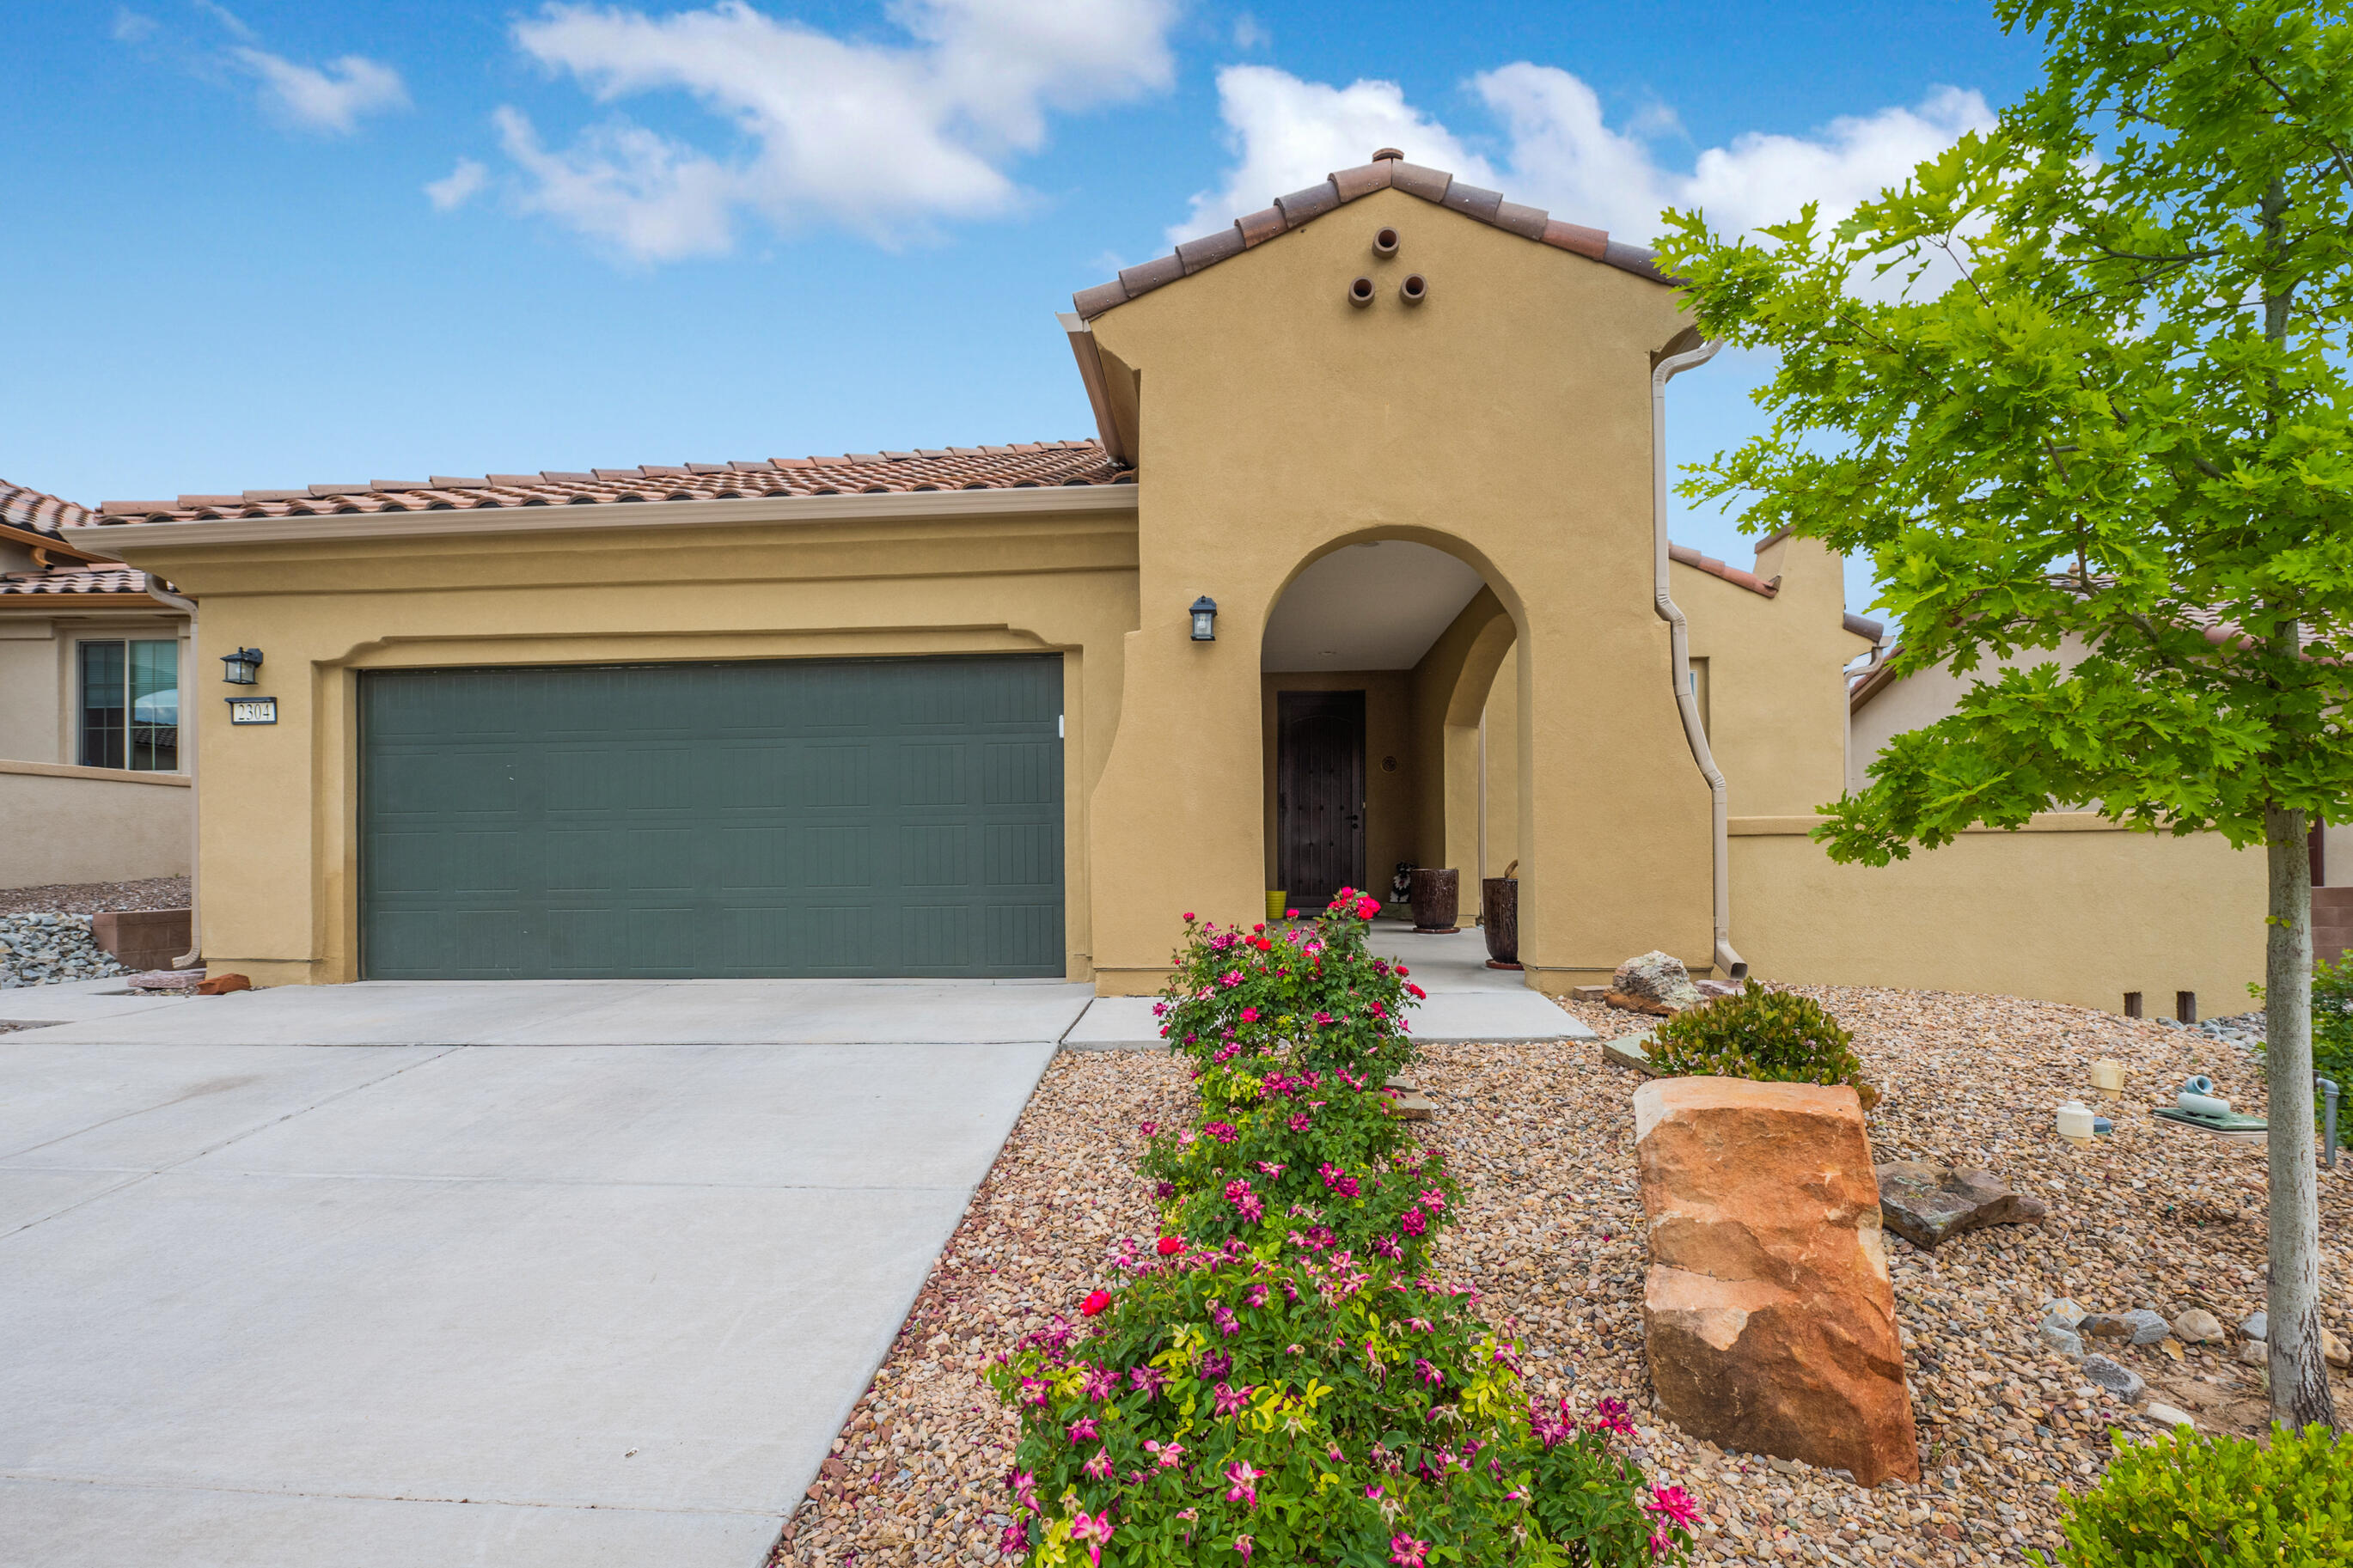 VIEWS, VIEWS, VIEWS! BEAUTIFUL ONE STORY HOME SITUATED ON A PREMIUM VIEW LOT LOCATED IN THE EXCLUSIVE 55+GATED COMMUNITY OF DEL WEBB MIREHAVEN!! Built in 2019, this 'Sanctuary' floorplan has approx. 1850 SF, 2 BRs plus and Office/Den, 2 Baths, Oversized 2  CG w/ 4FT Extension! Views of the Sandia & Manzano Mts and City are seen from the Living Room, Dining Room, Kitchen and Primary Bedroom!  Home Features: Gorgeous Tile Flooring, High End Ceiling Fans & Lighting, Kitchen has a large island w/raised dishwasher, beautiful Granite & Splash, Pantry, Gas Cooktop & Range Hood, Beautiful Cabinetry w/plenty of storage! Primary BR has a Bay Window, Large WIC, DBL Sinks, Full Guest Bath, Added Cabinets in Laundry! Custom Landscaped Backyard! You'll Love the Sandia Amenity Center!!